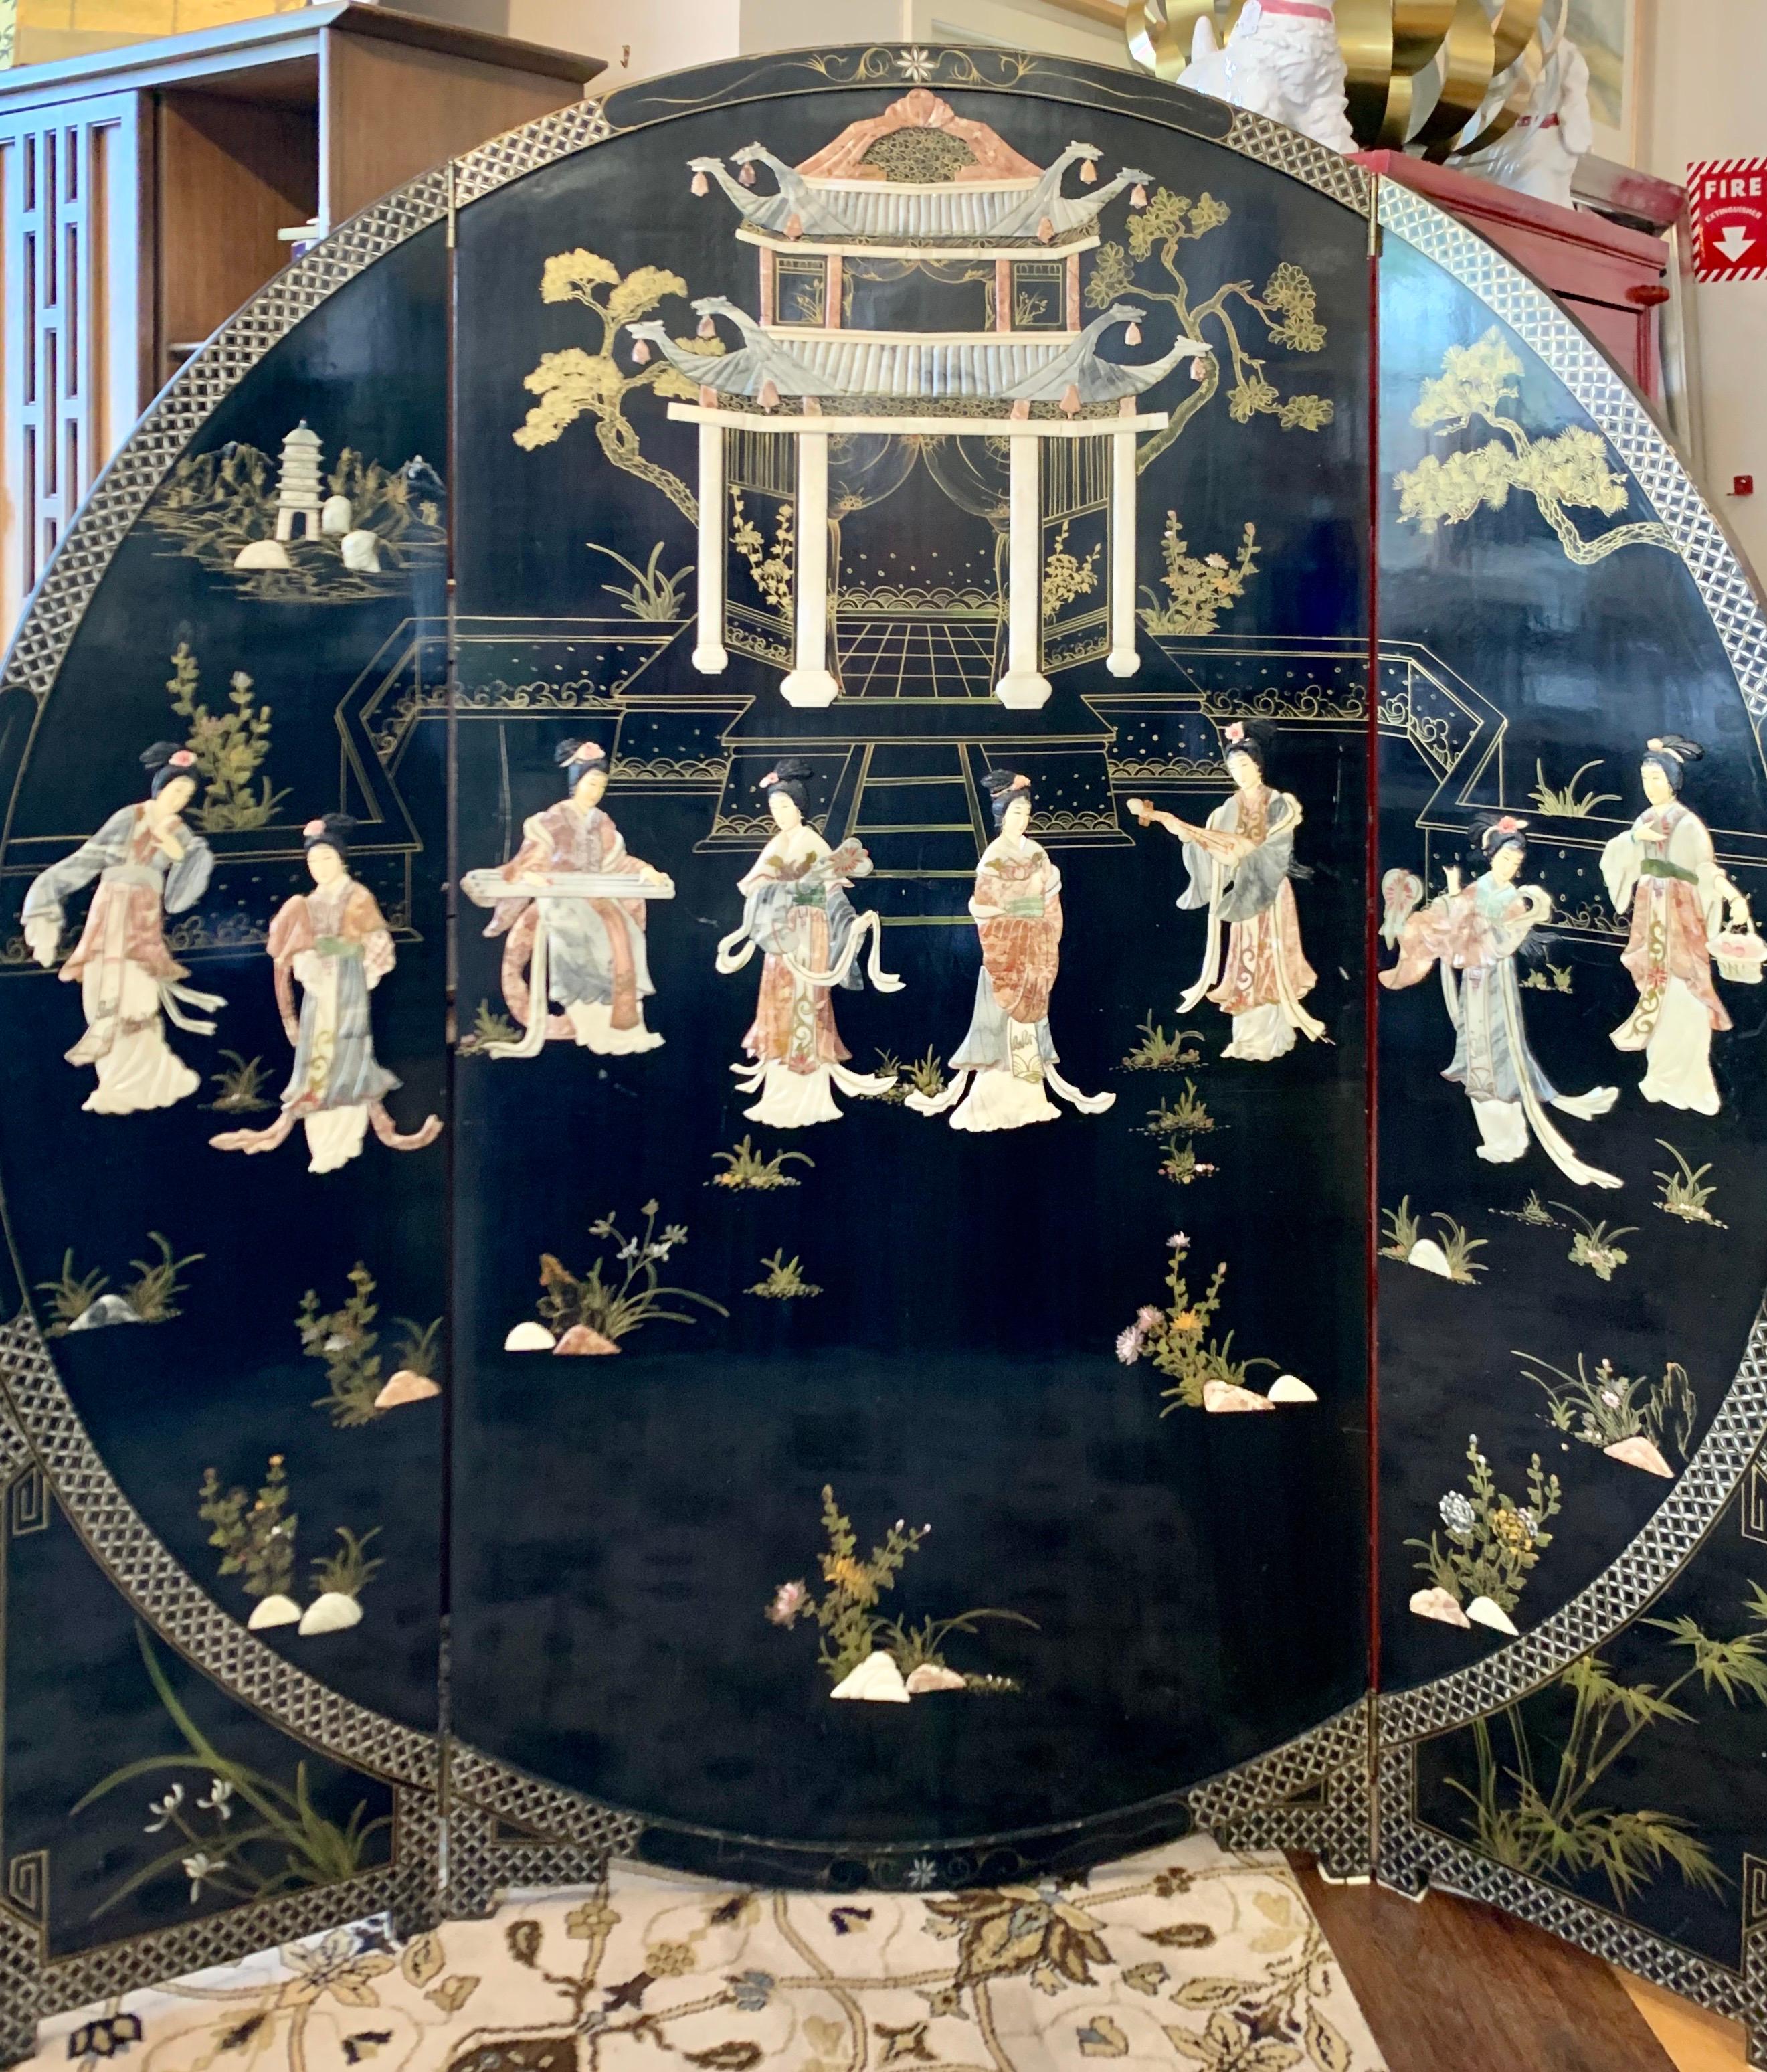 A Chinese export round black lacquer screen with molded hardstone figures , pagoda and gold painted oriental landscape.

The side pieces fold in and measure eighteen inches each and the center piece measures thirty six inches wide. When it is fully